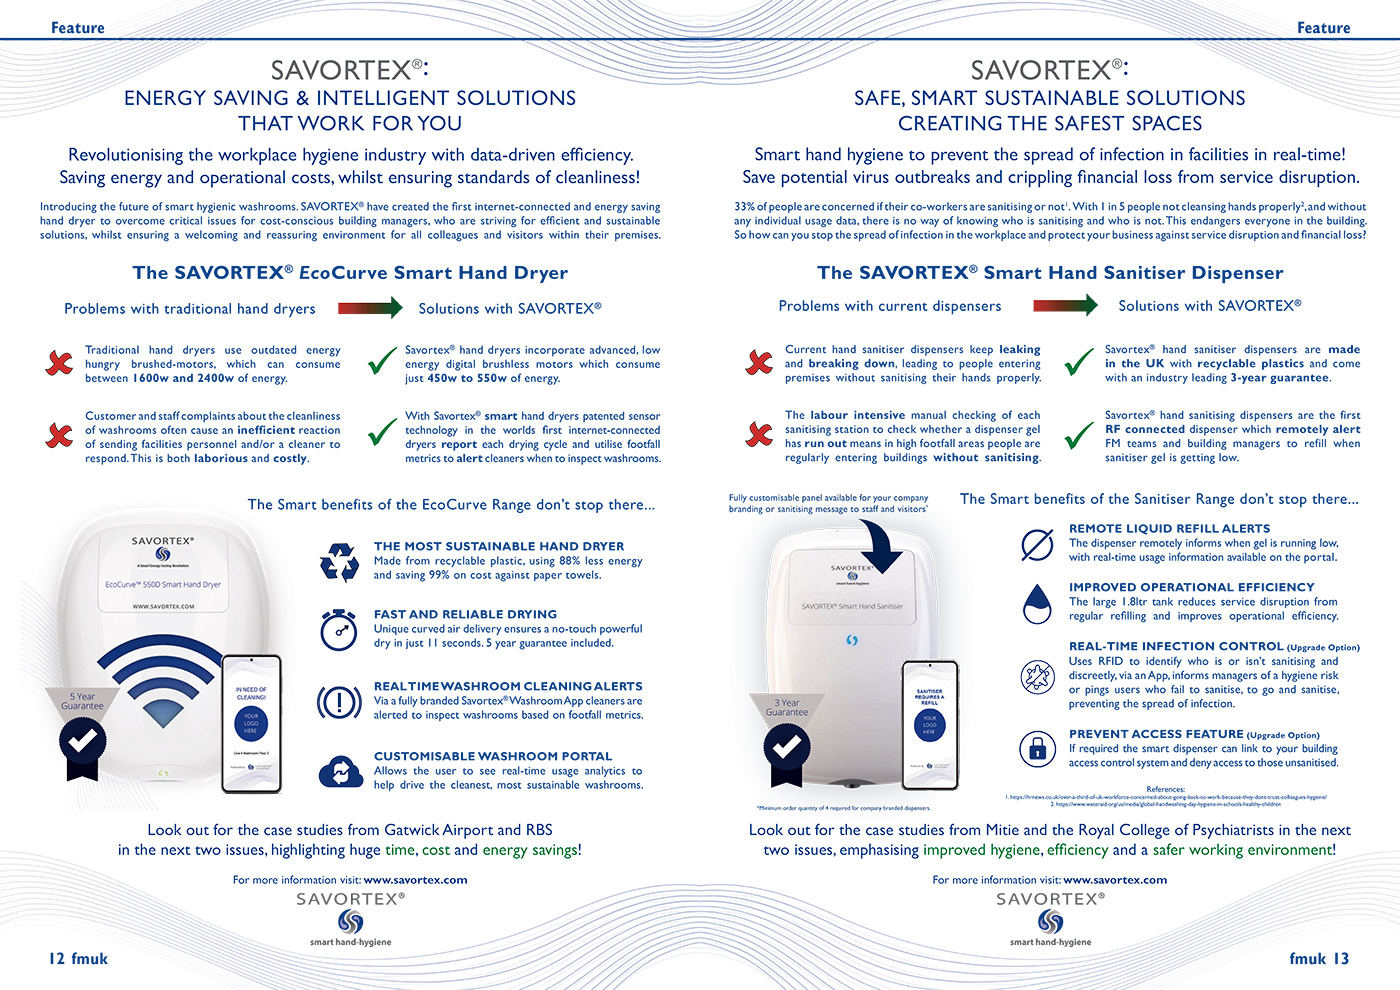 SAVORTEX®: Energy Saving & Intelligent Solutions That Work For You